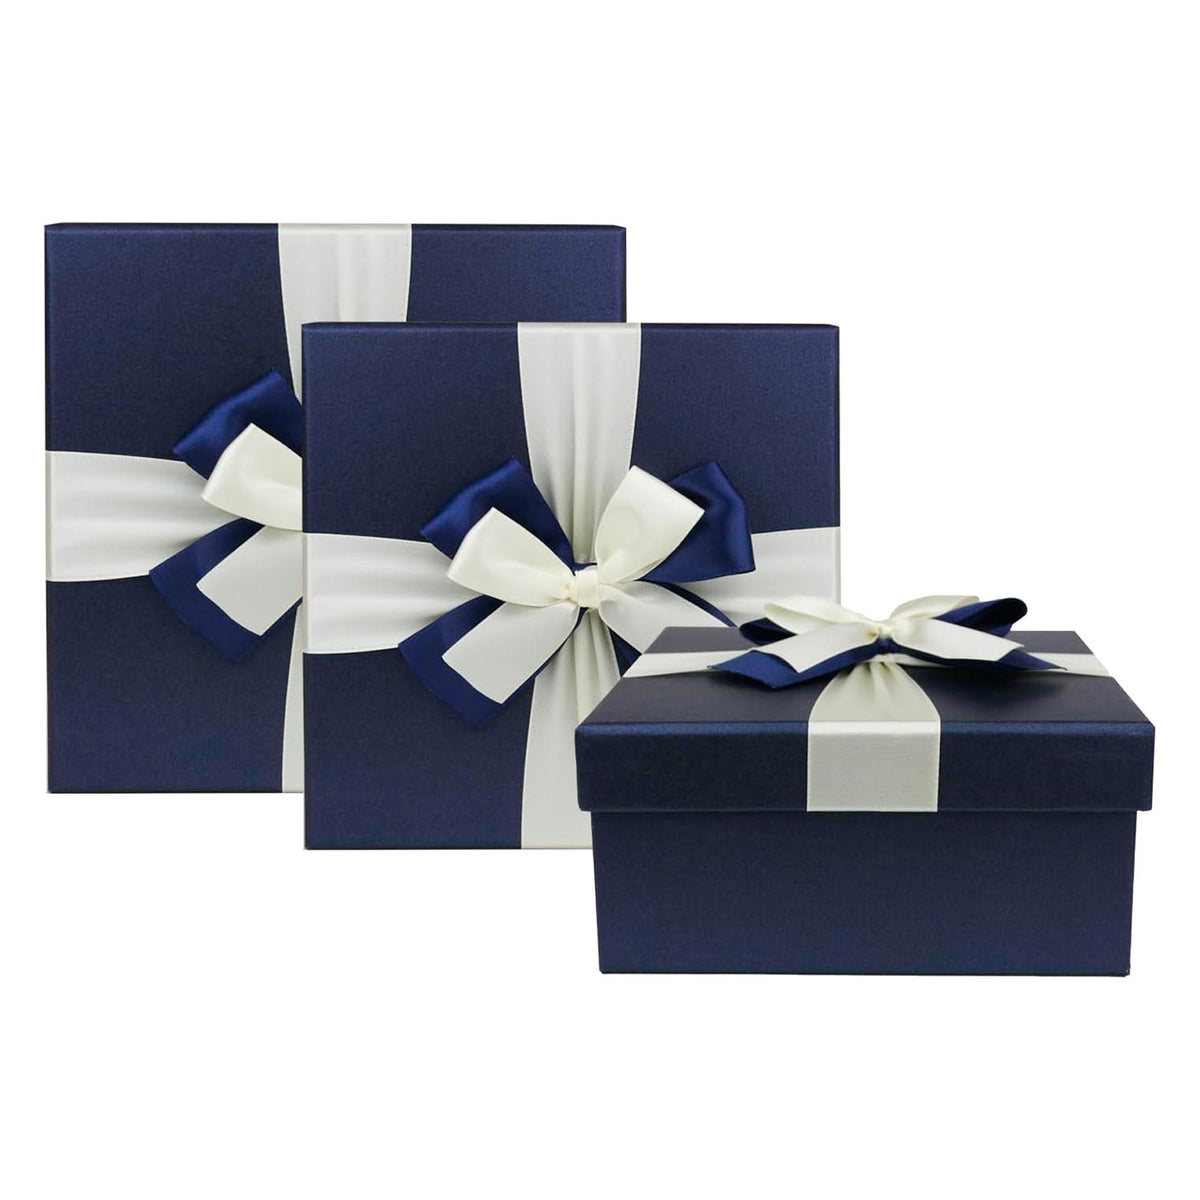 Set of 3 Blue Gift Boxes With White Satin Ribbon